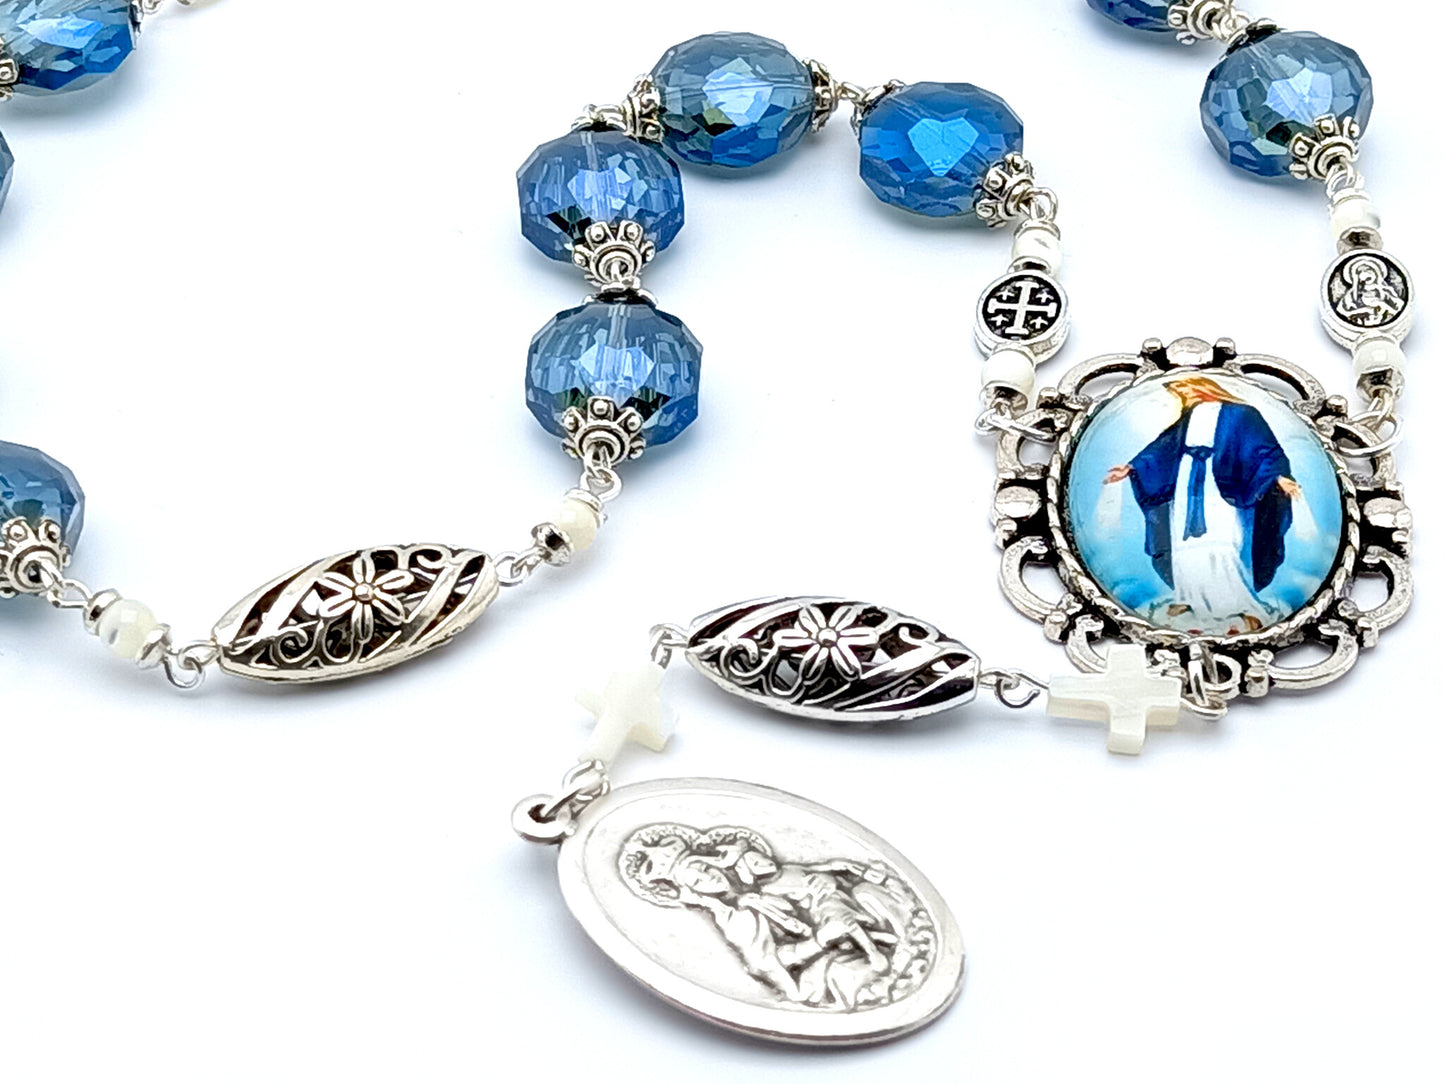 The Immaculate Conception unique rosary beads prayer chaplet with blue faceted and silver beads, picture centre medal and brown scapular end medal.